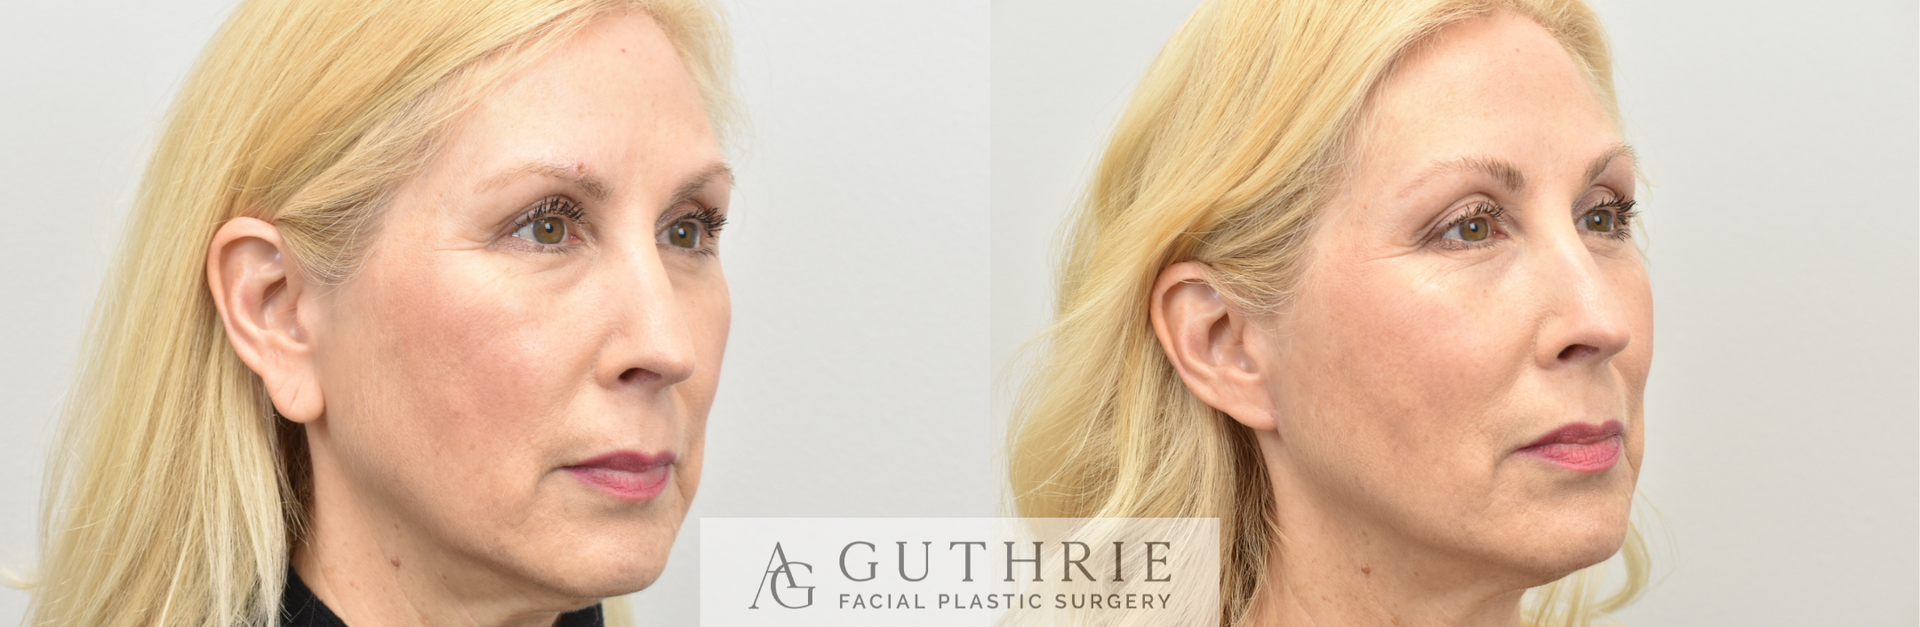 woman before and after earlobe reduction